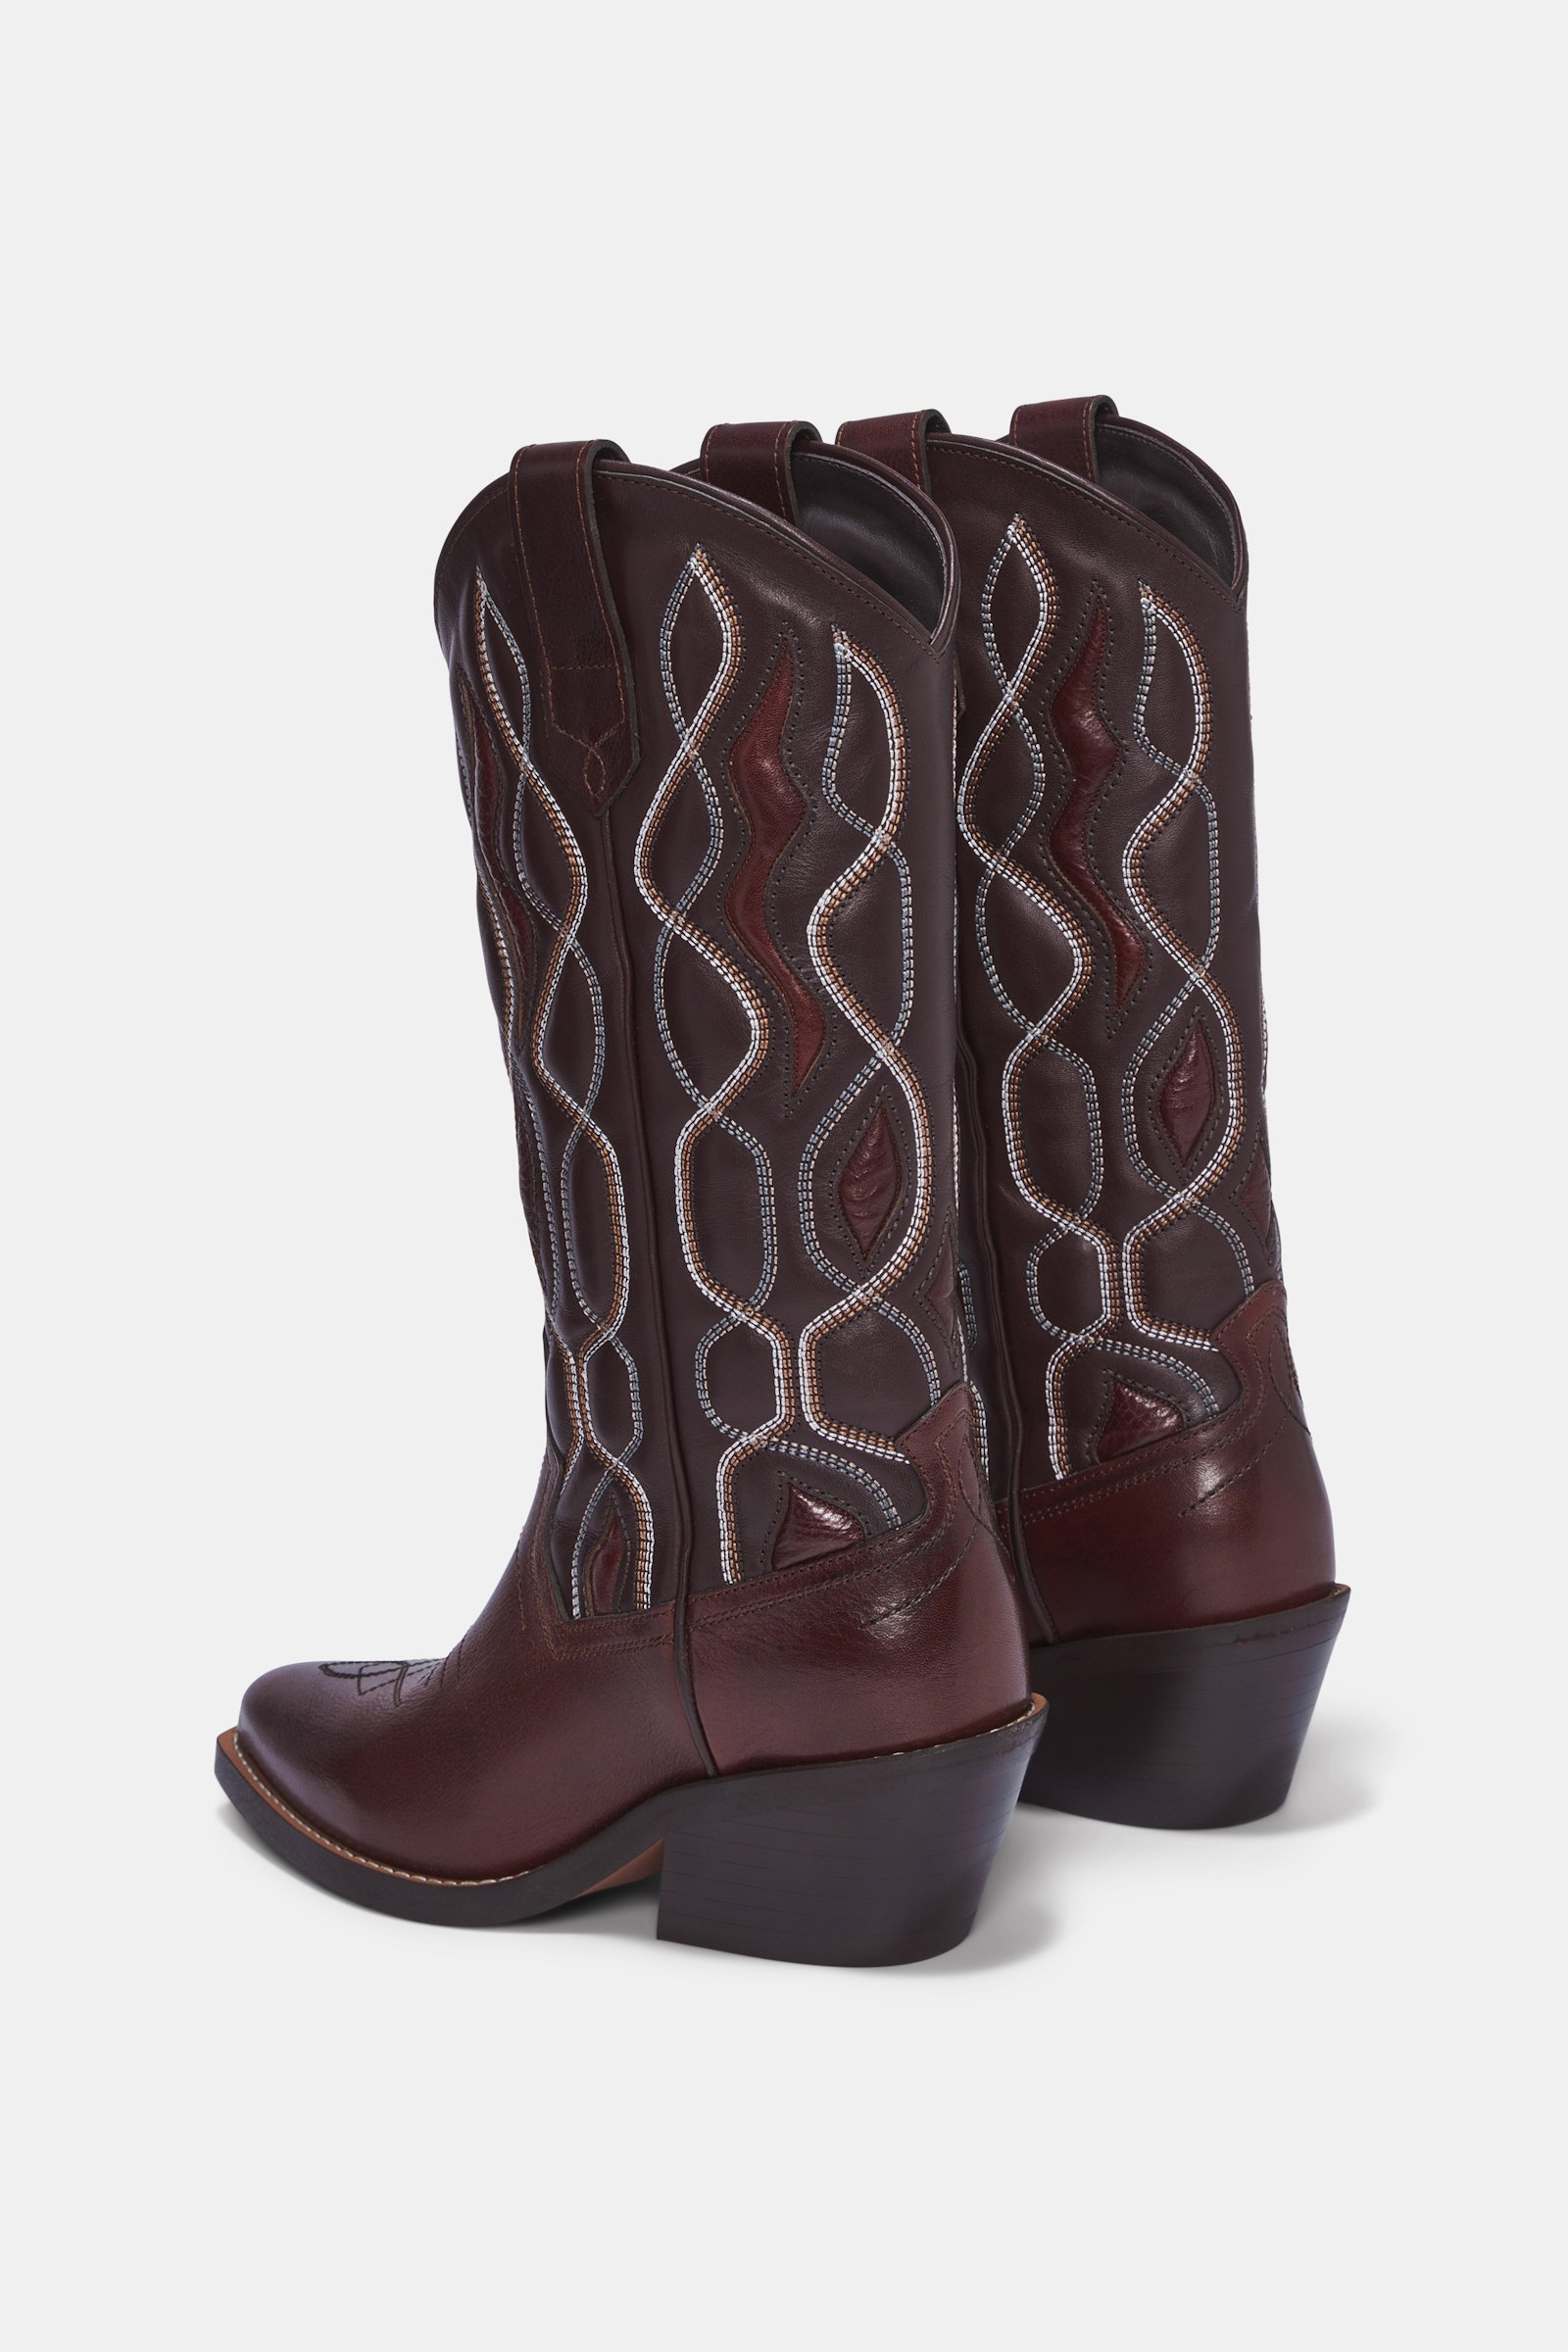 Dorothee Schumacher Embroidered cowboy boots brown mix